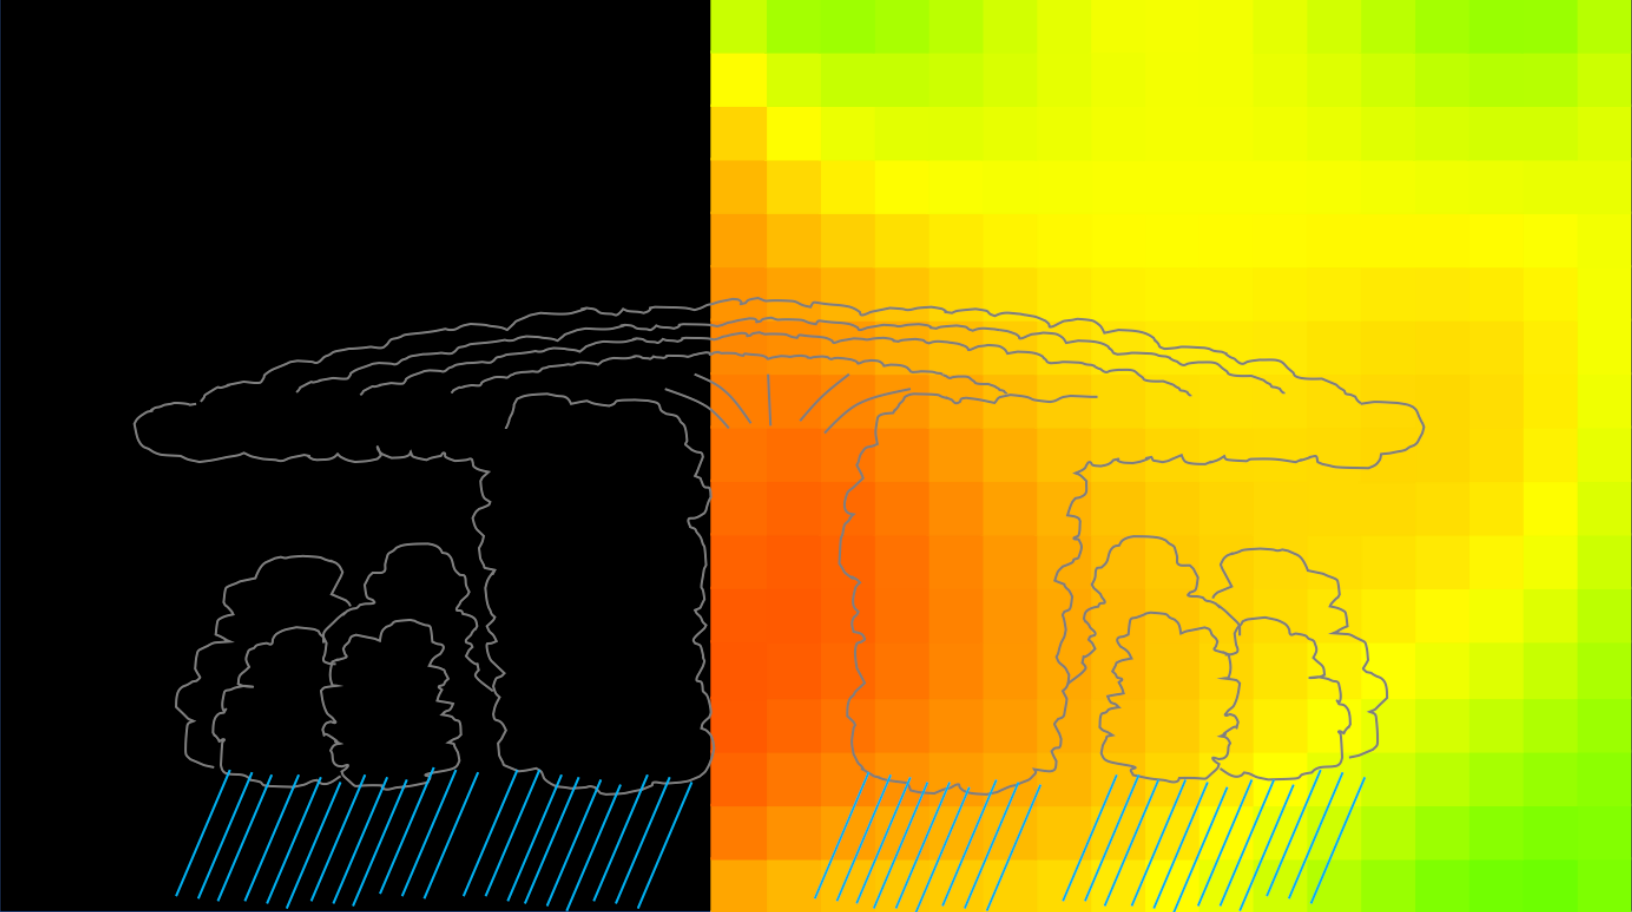 A line diagram of a cyclone, the right side has colored squares over the line drawing